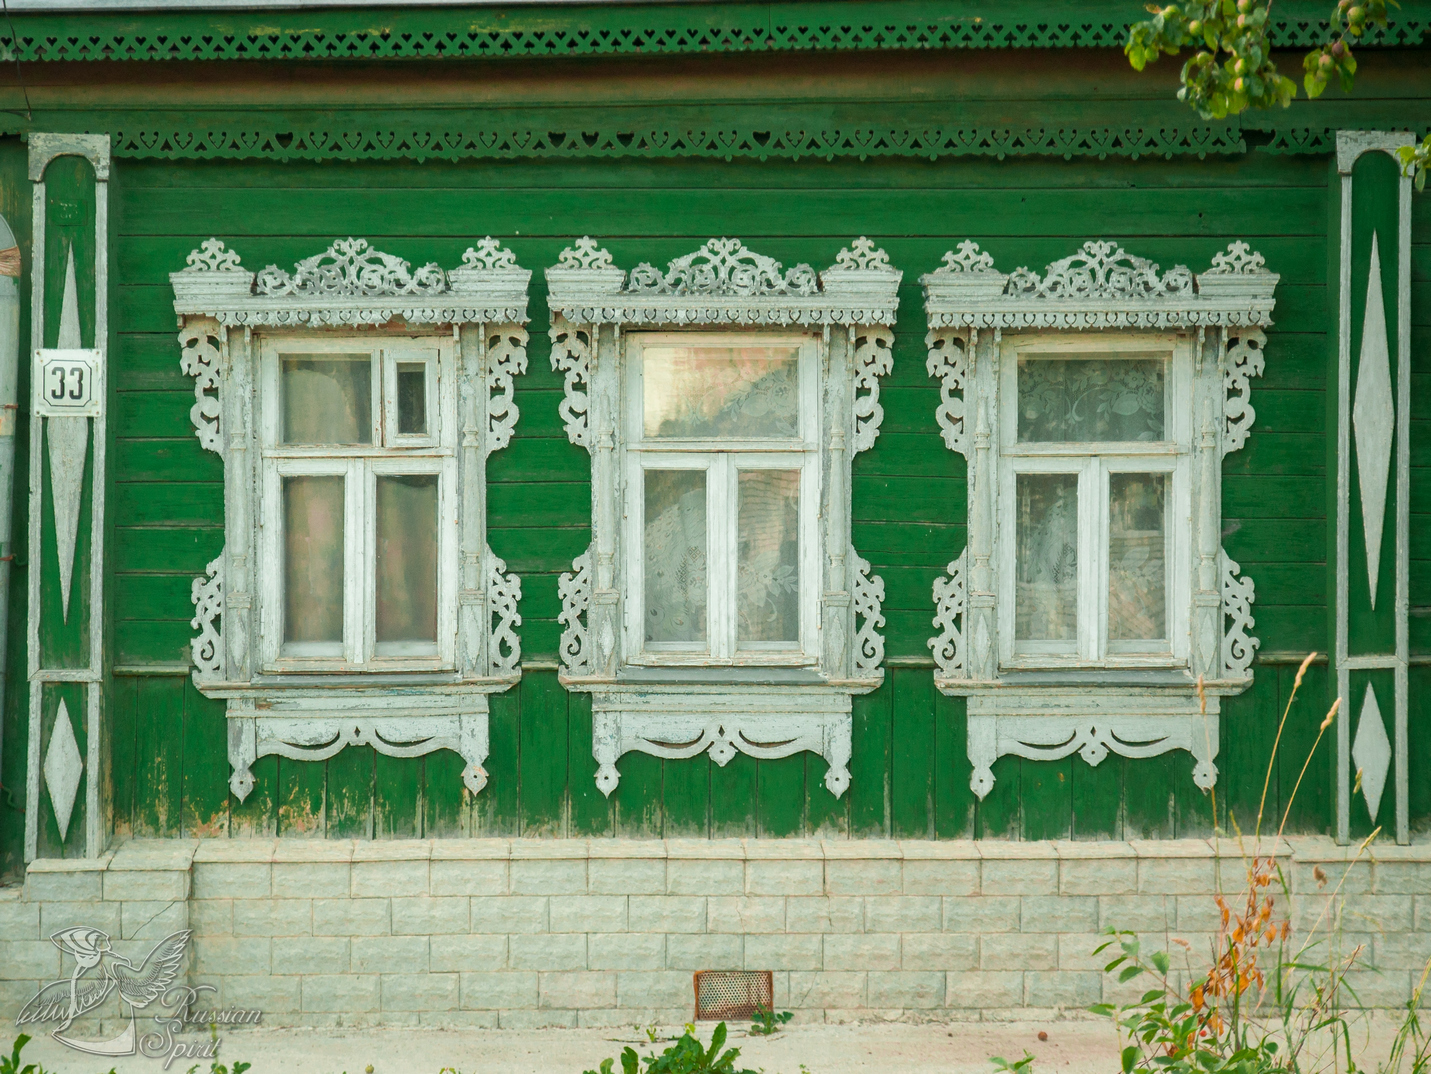 Suzdal's house